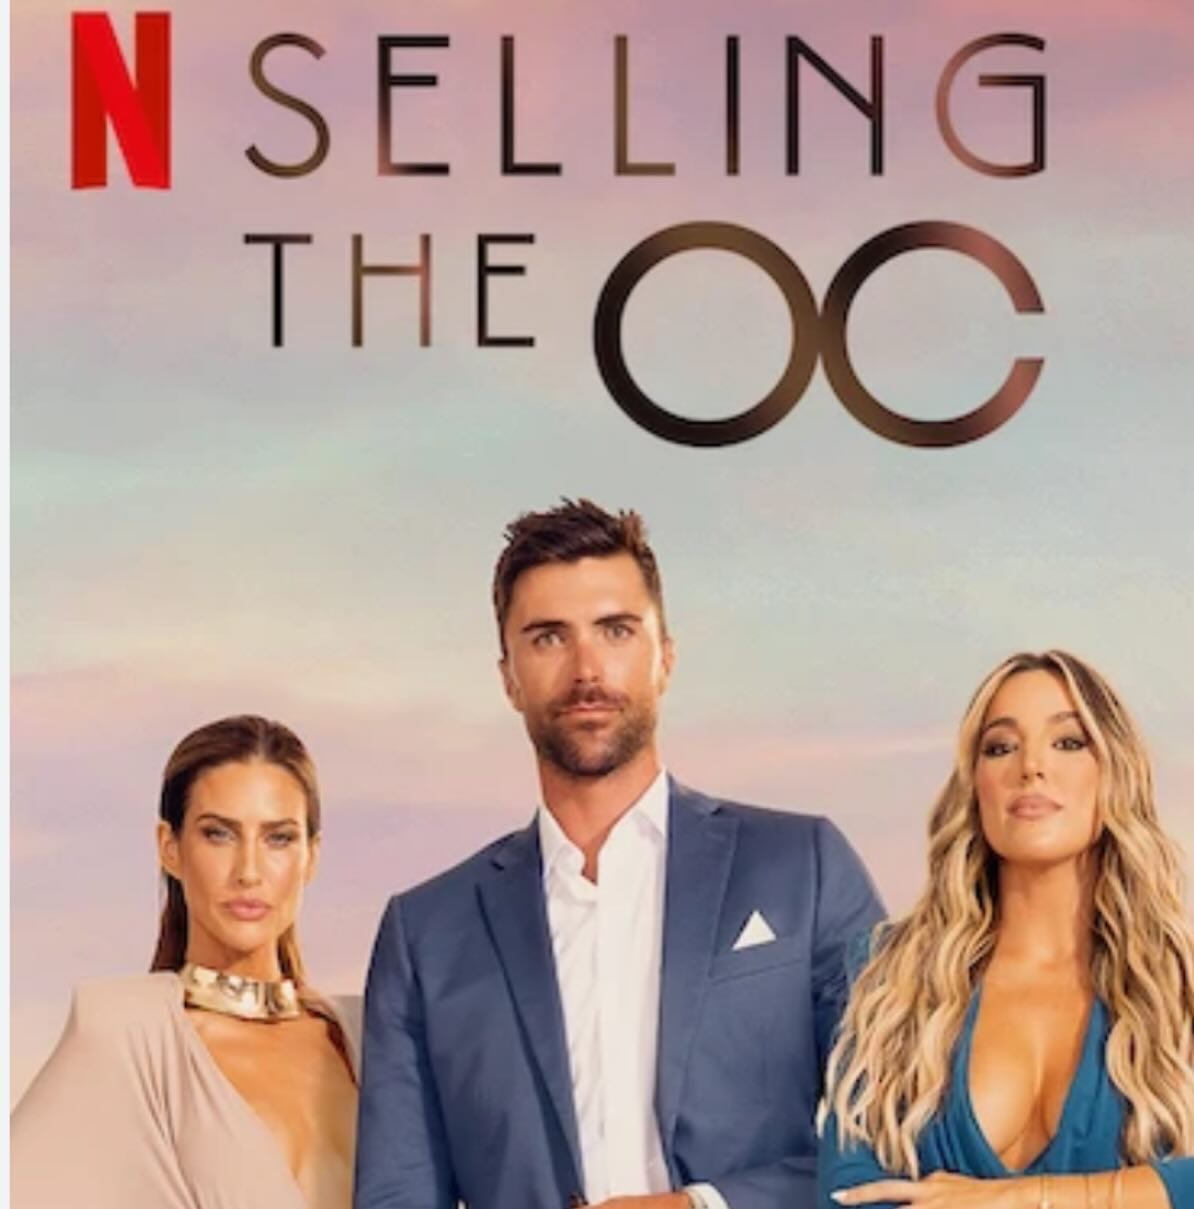 Selling the OC season 3 is two days away. Starting May 3rd all your favorite OC real estate agents are back and this season is hot hot hot!! Time to tune into Netflix and binge the whole season!  Let&rsquo;s go!!!!! @sellingtheocnetflix @netflix